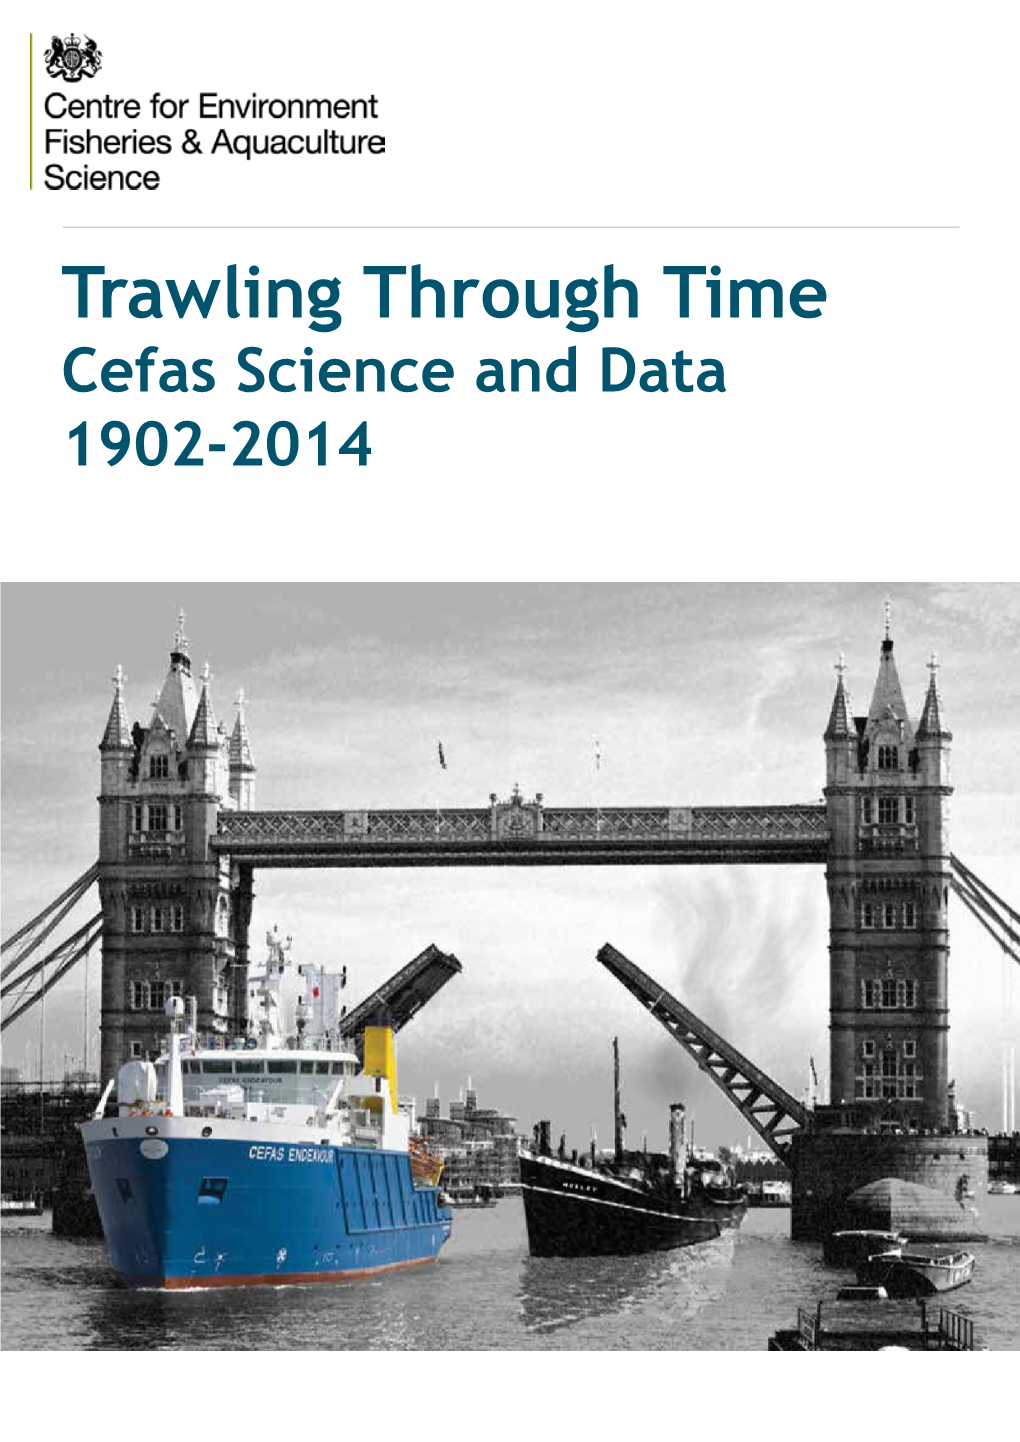 Trawling Through Time Cefas Science and Data 1902-2014 Introduction